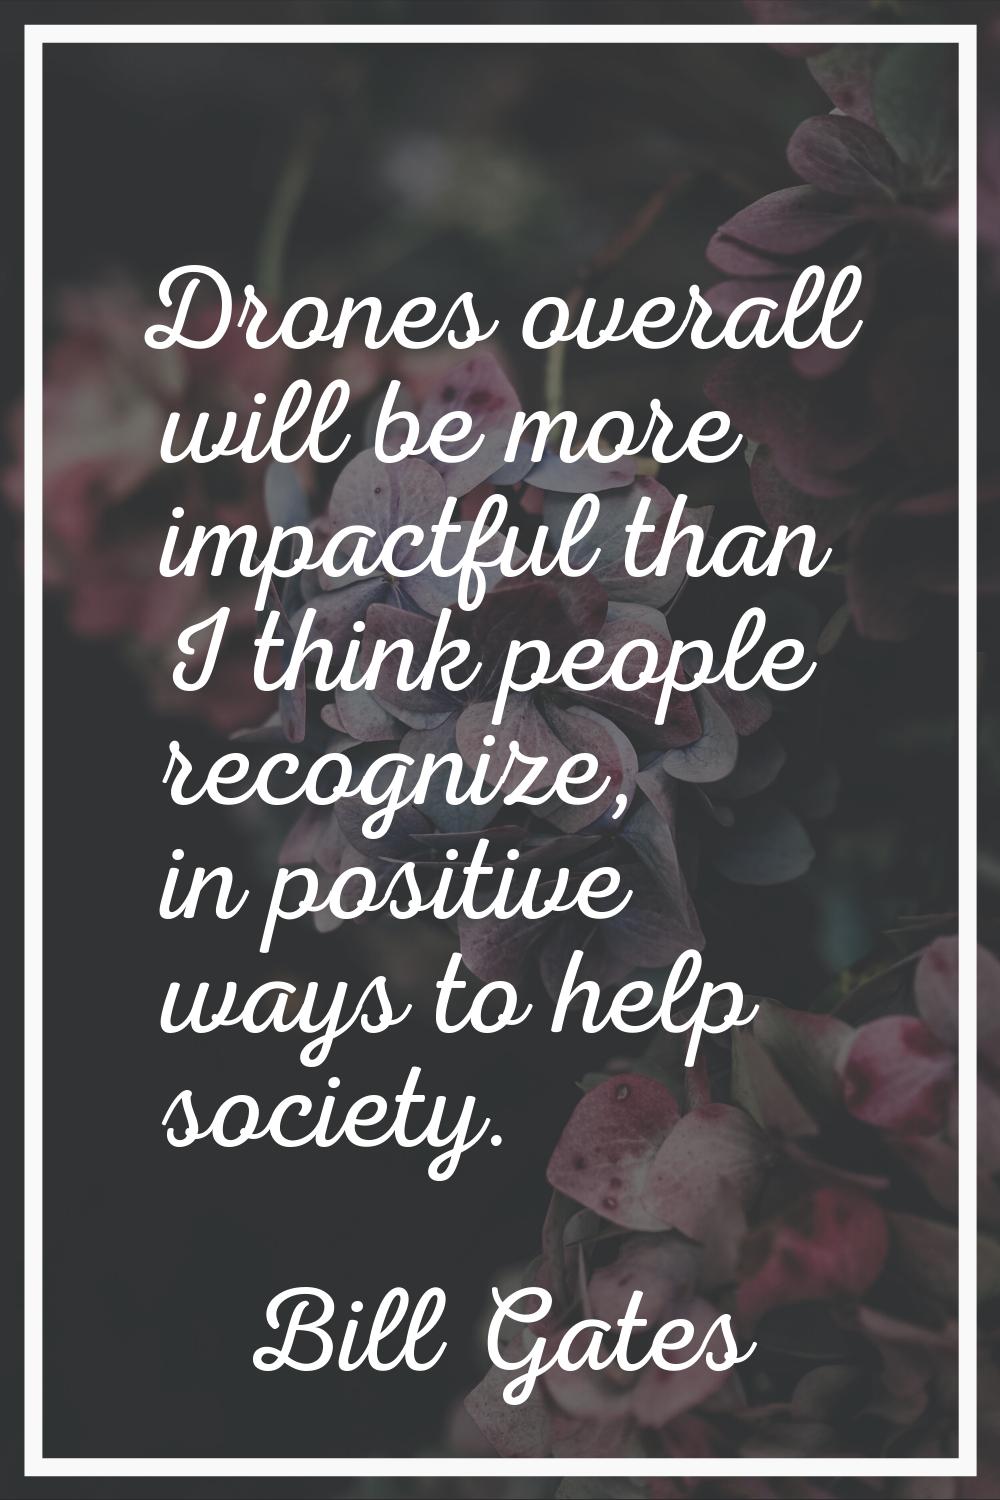 Drones overall will be more impactful than I think people recognize, in positive ways to help socie